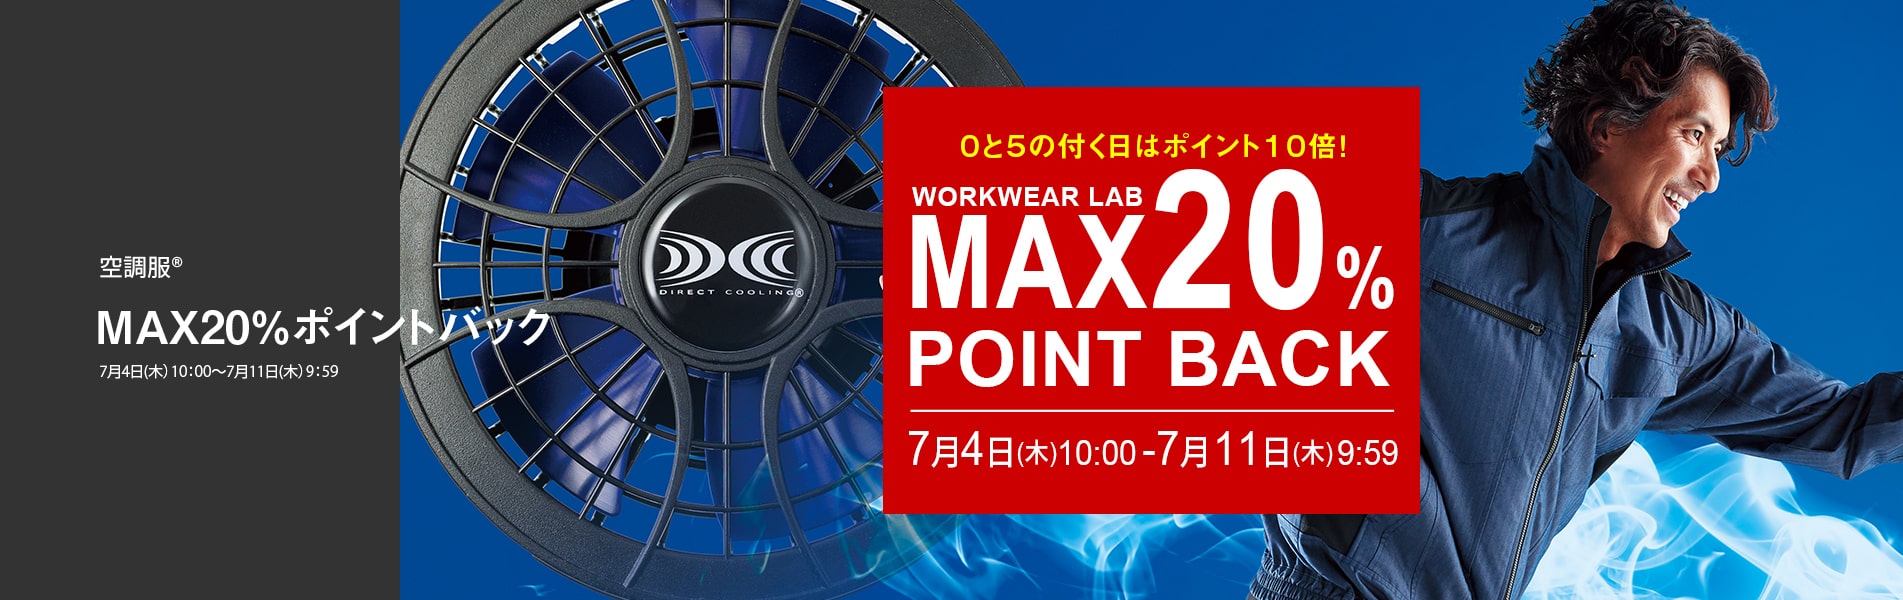 MAX20%POINT BACK